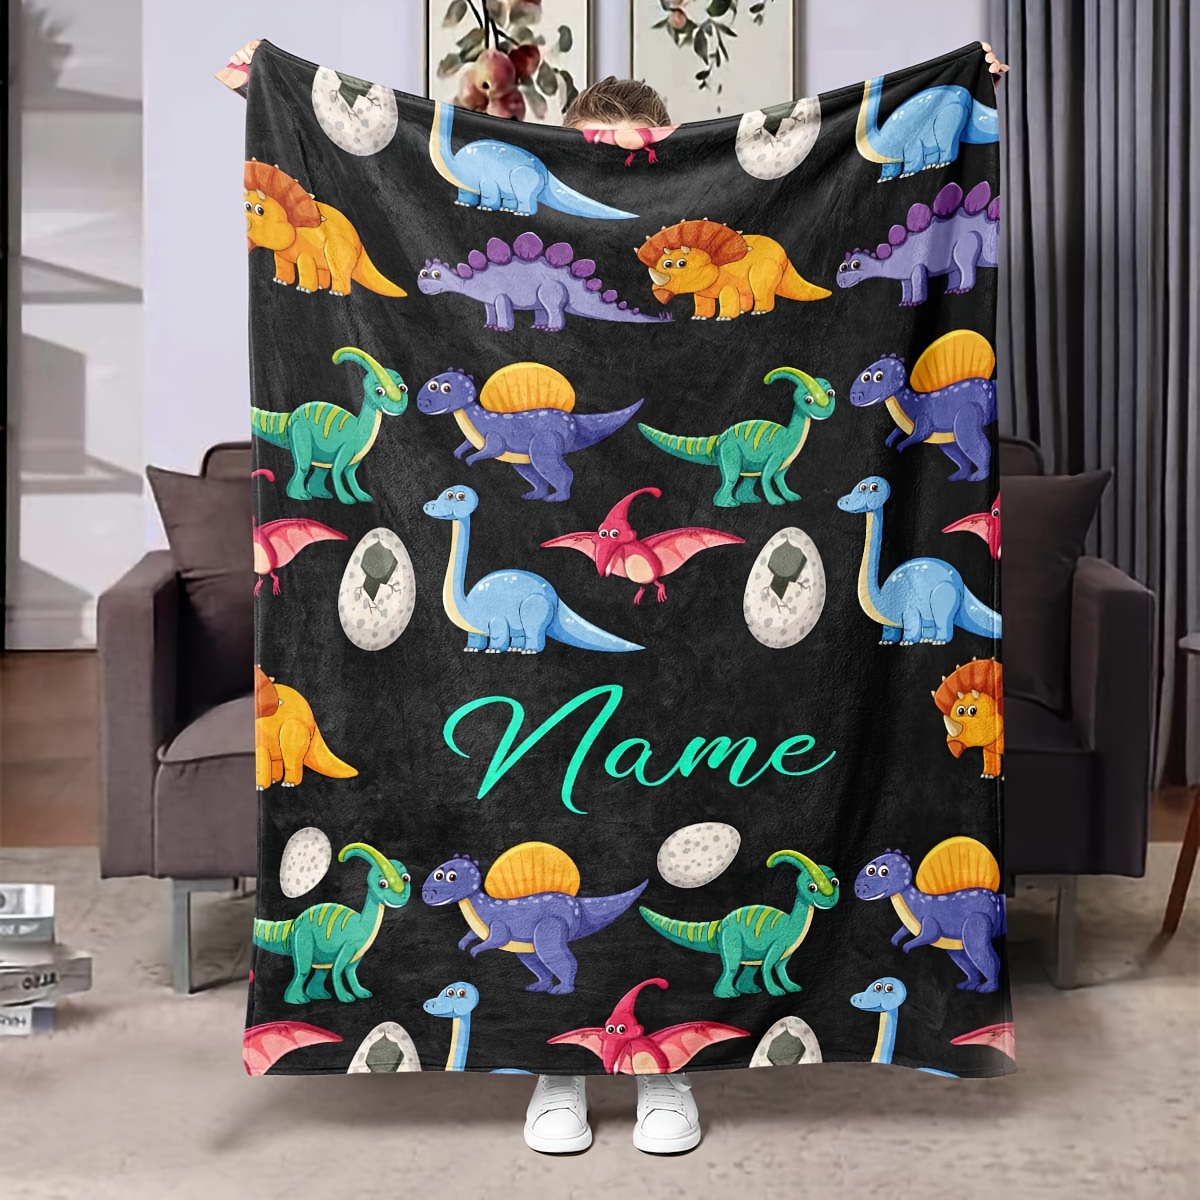 

Custom Dinosaur Cartoon Flannel Throw Blanket - Personalized Name, Soft & Warm For Couch, Office, Or Bed - Perfect Holiday Gift